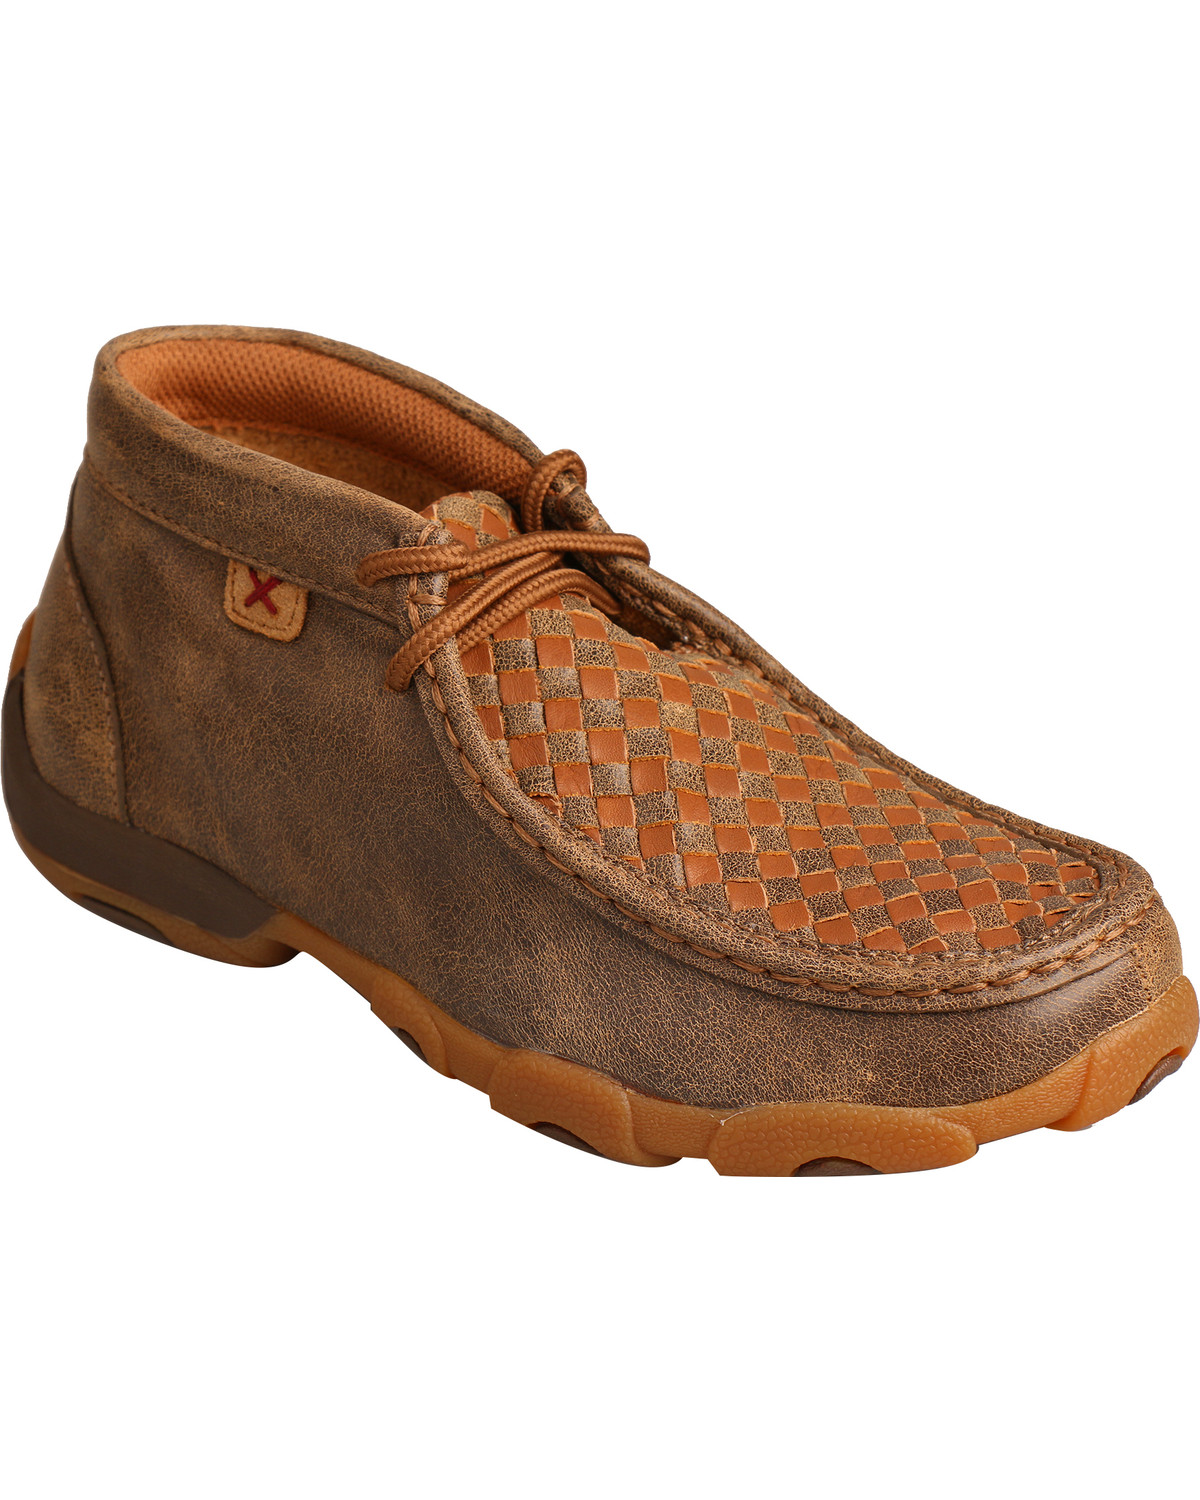 Twisted X Boys' Tall Driving Moccasins- Round Toe